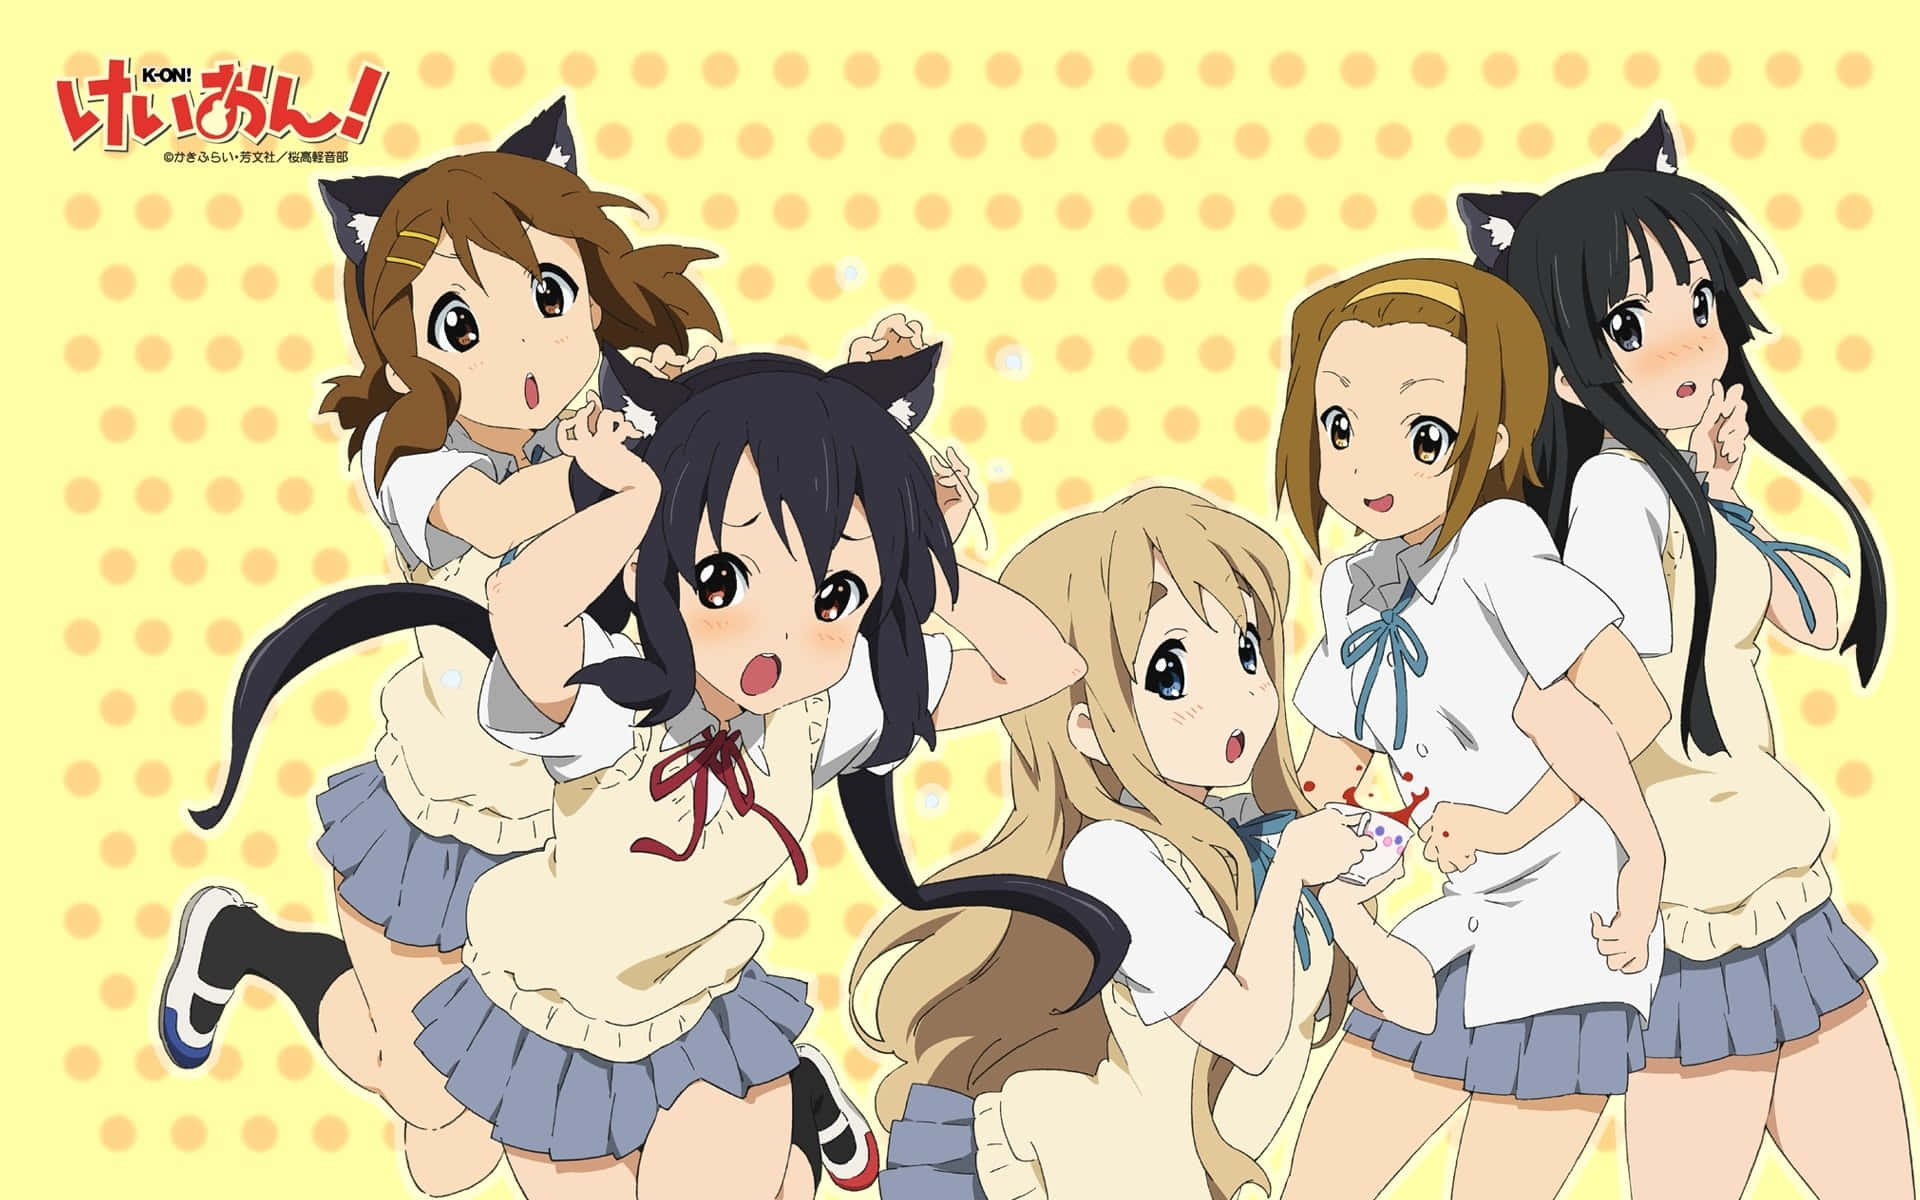 A Group Of Anime Girls In Uniforms